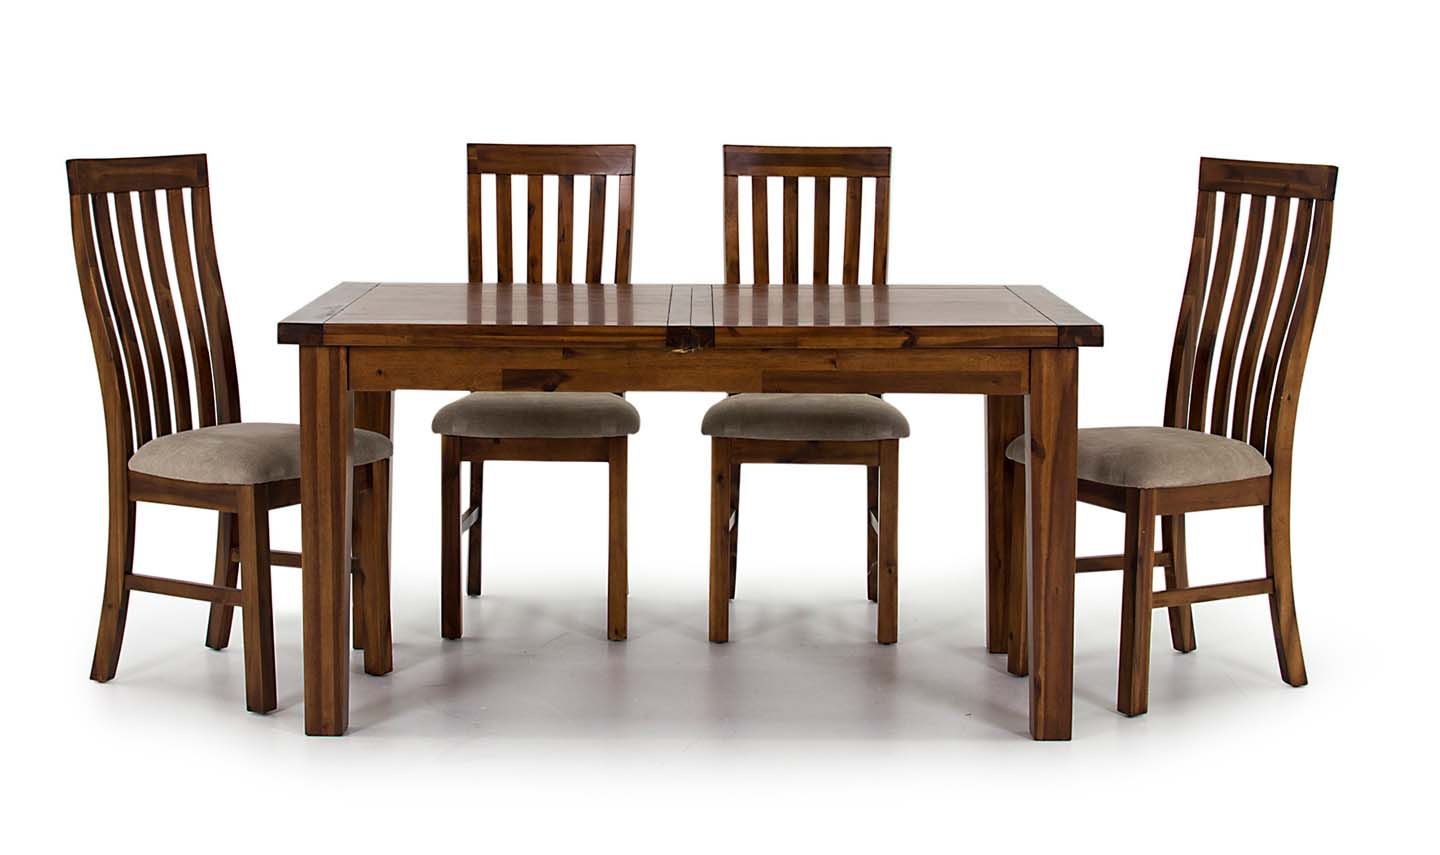 Friuli Solid Acacia Dark Brown Extending Dining Table 218vd394 With Regard To Popular Solid Acacia Wood Dining Tables (View 27 of 30)